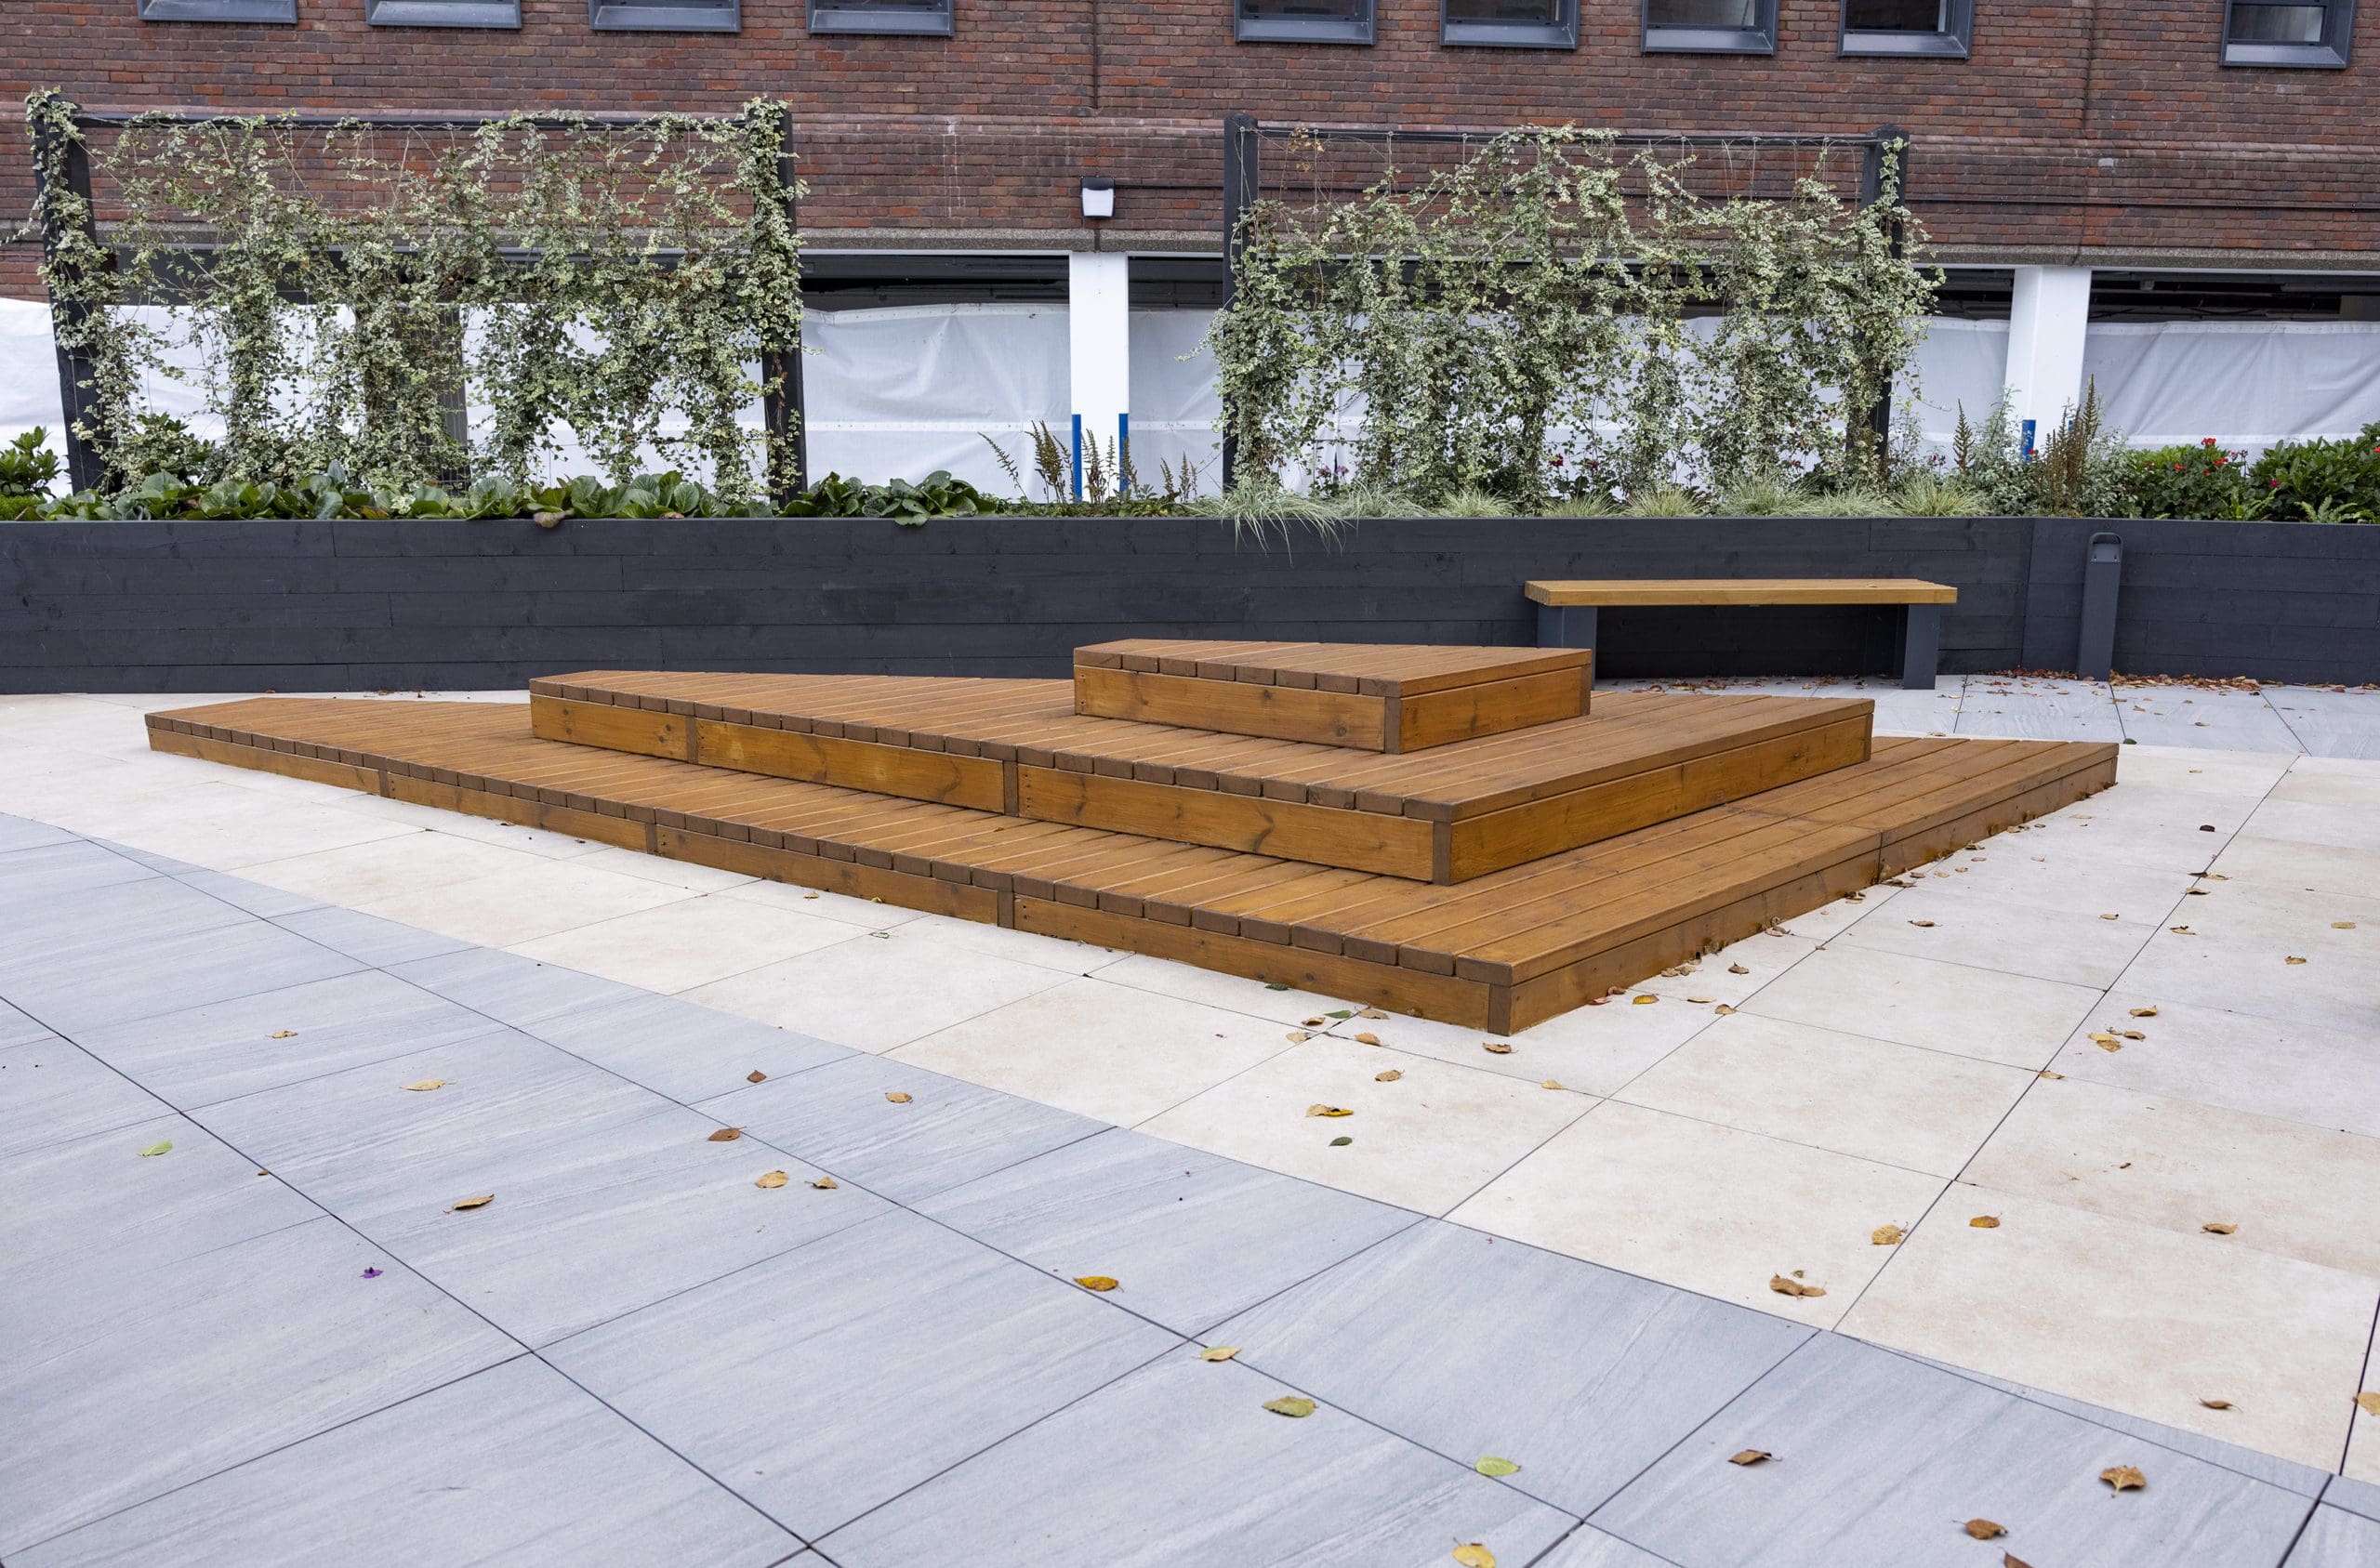 wooden stepped three tier decking doubling as exterior seating area